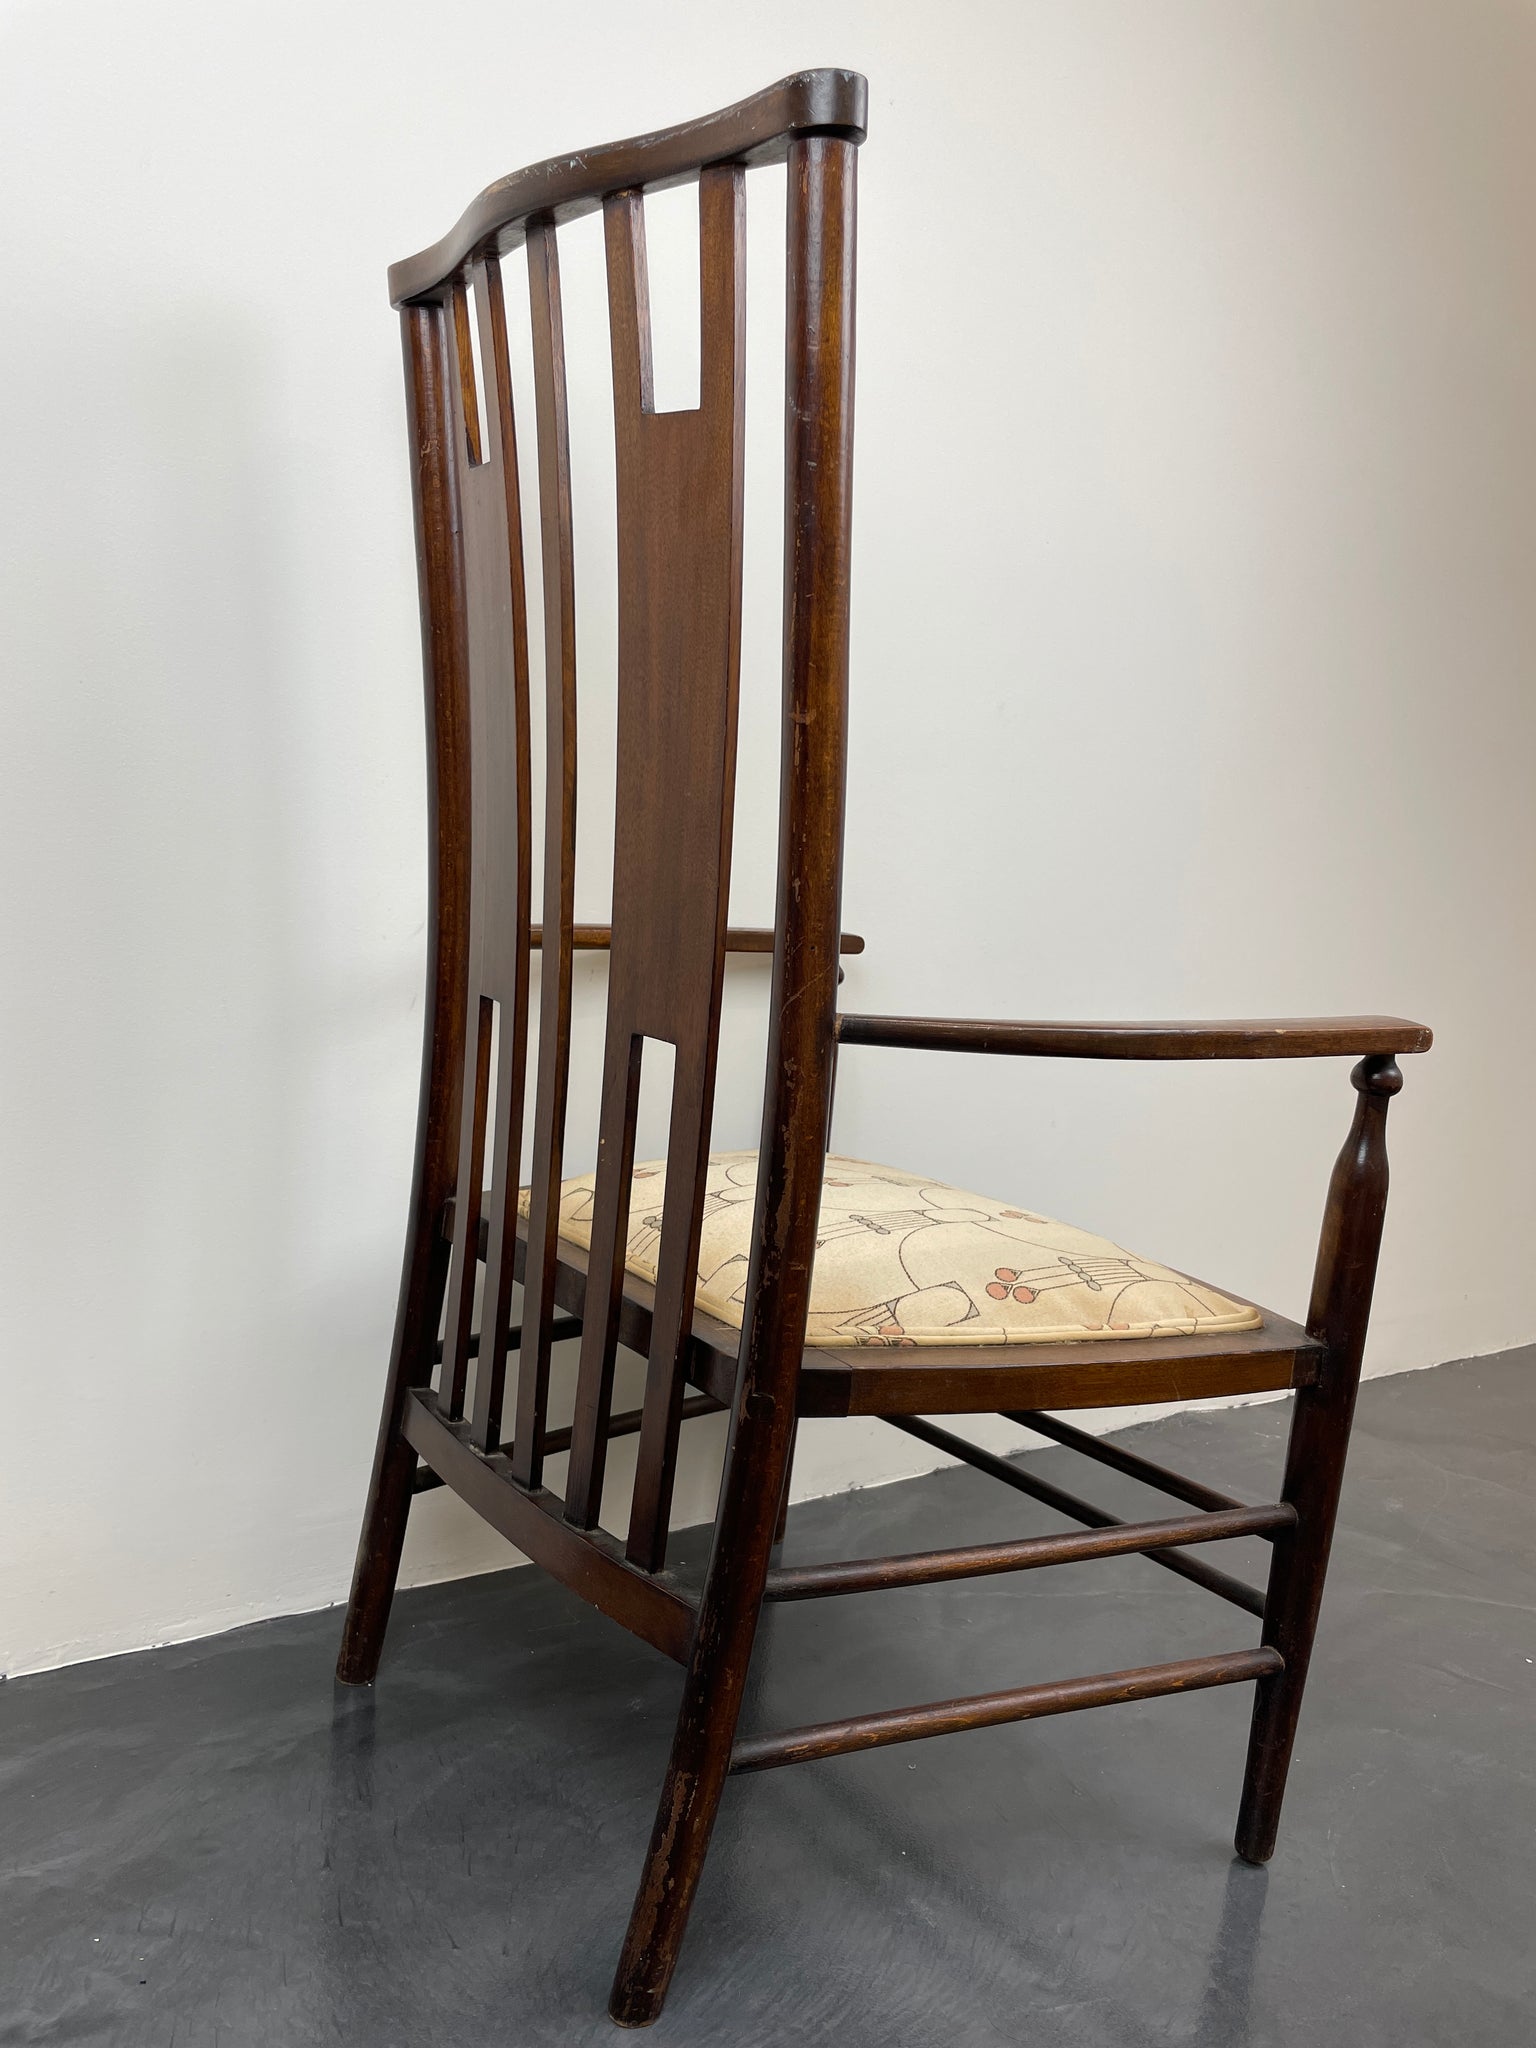 Charles Rennie Mackintosh [STYLE OF] Low Armchair, early 20th c.